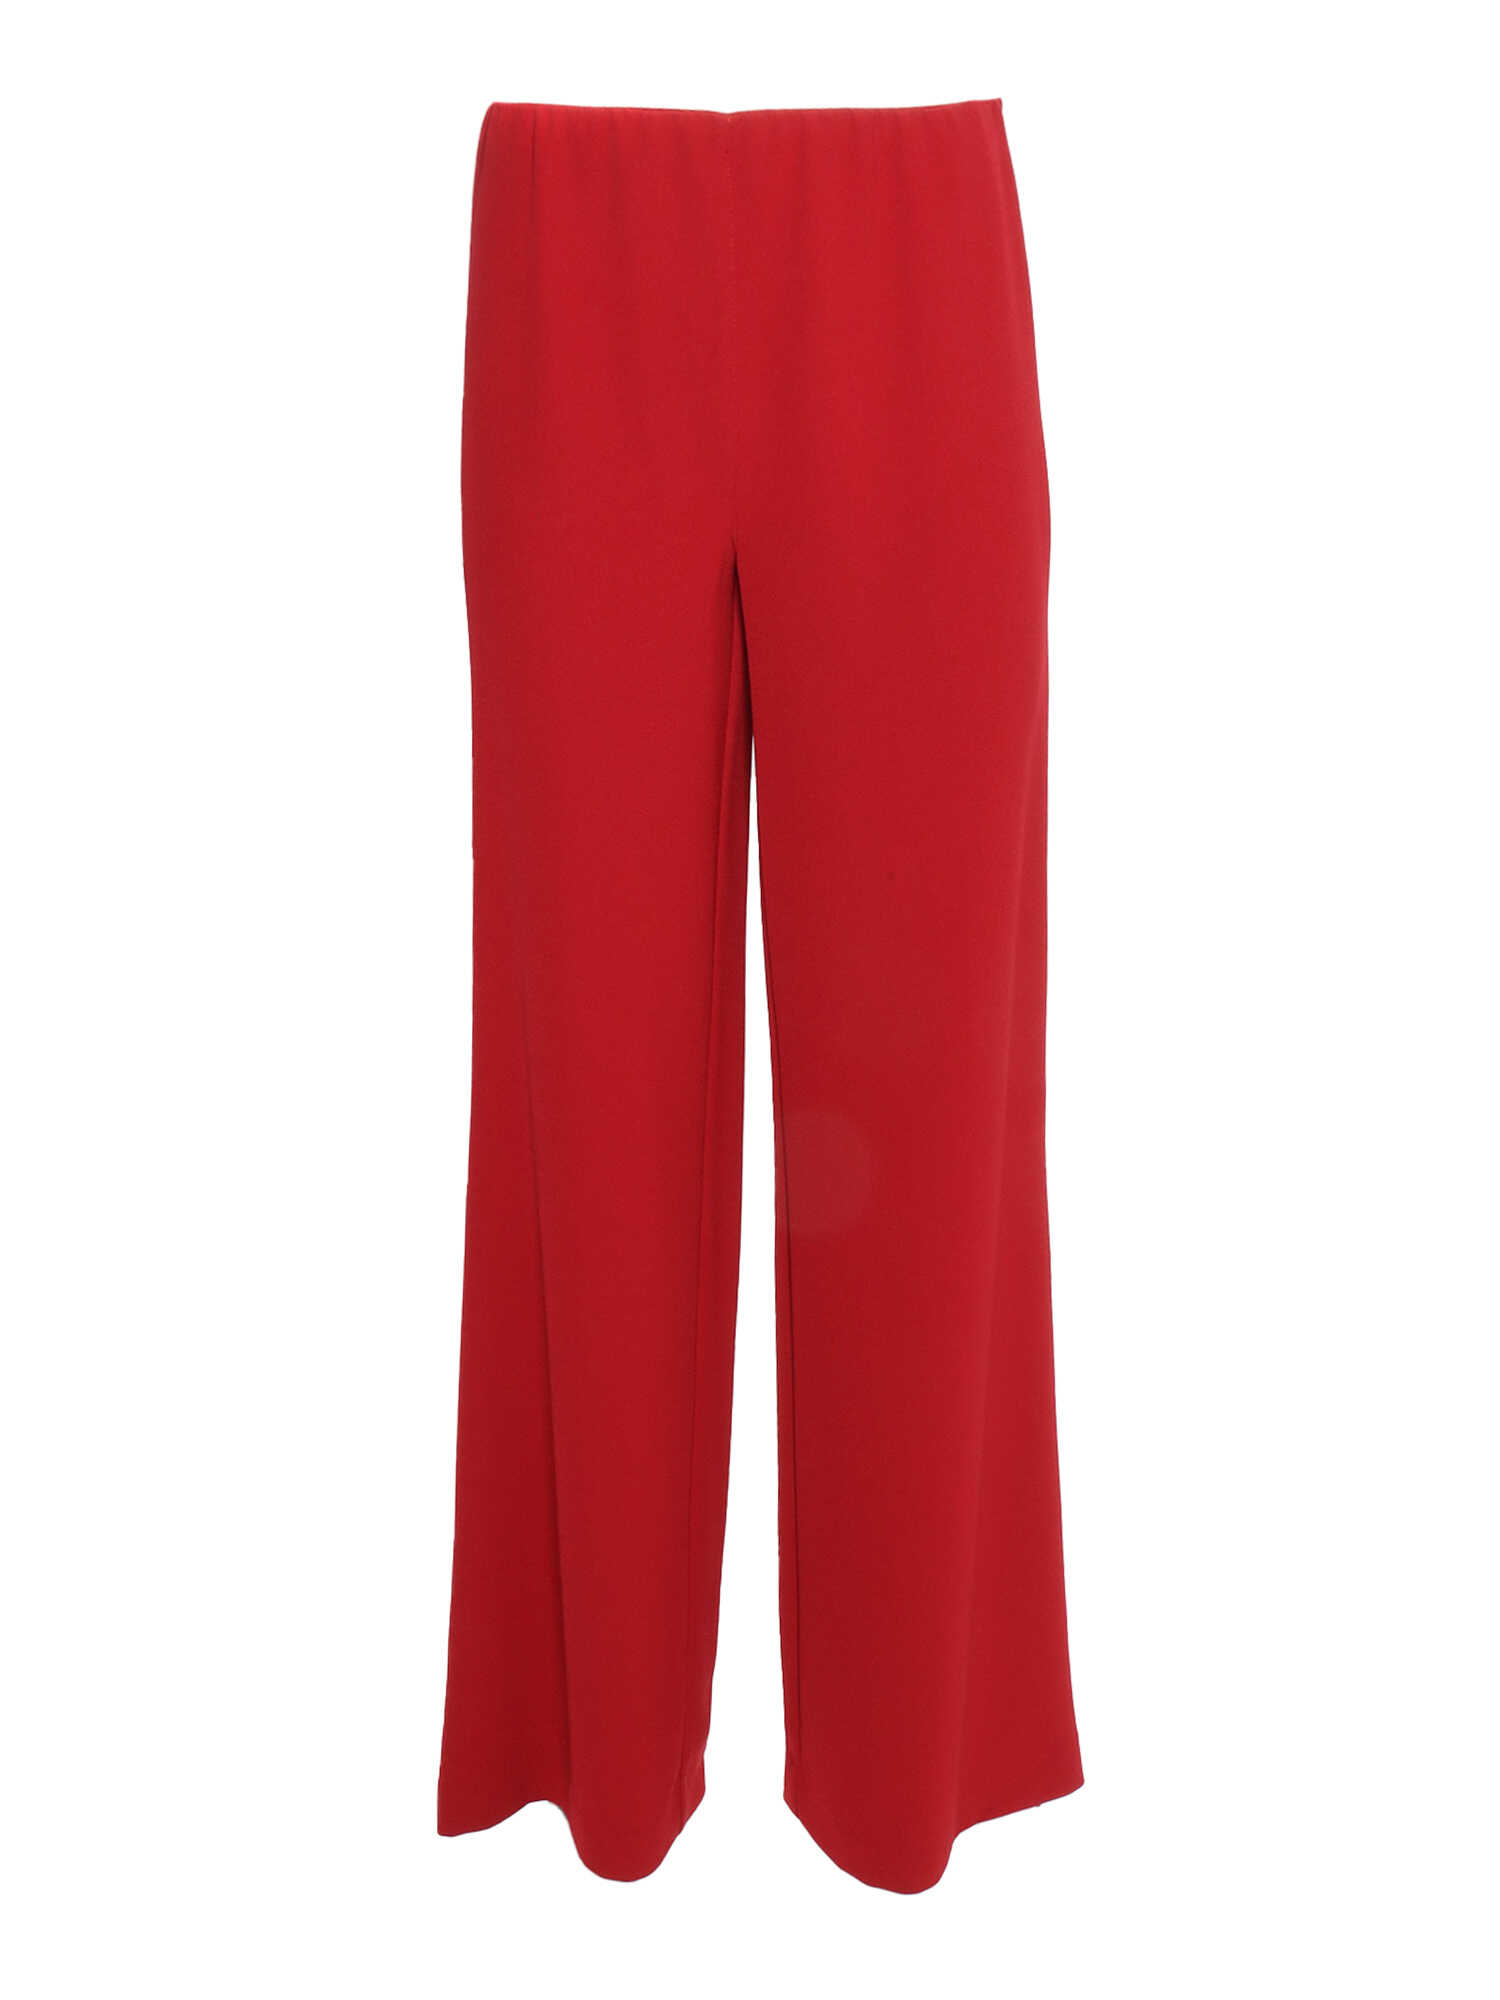 P.A.R.O.S.H. Pirates pants Red